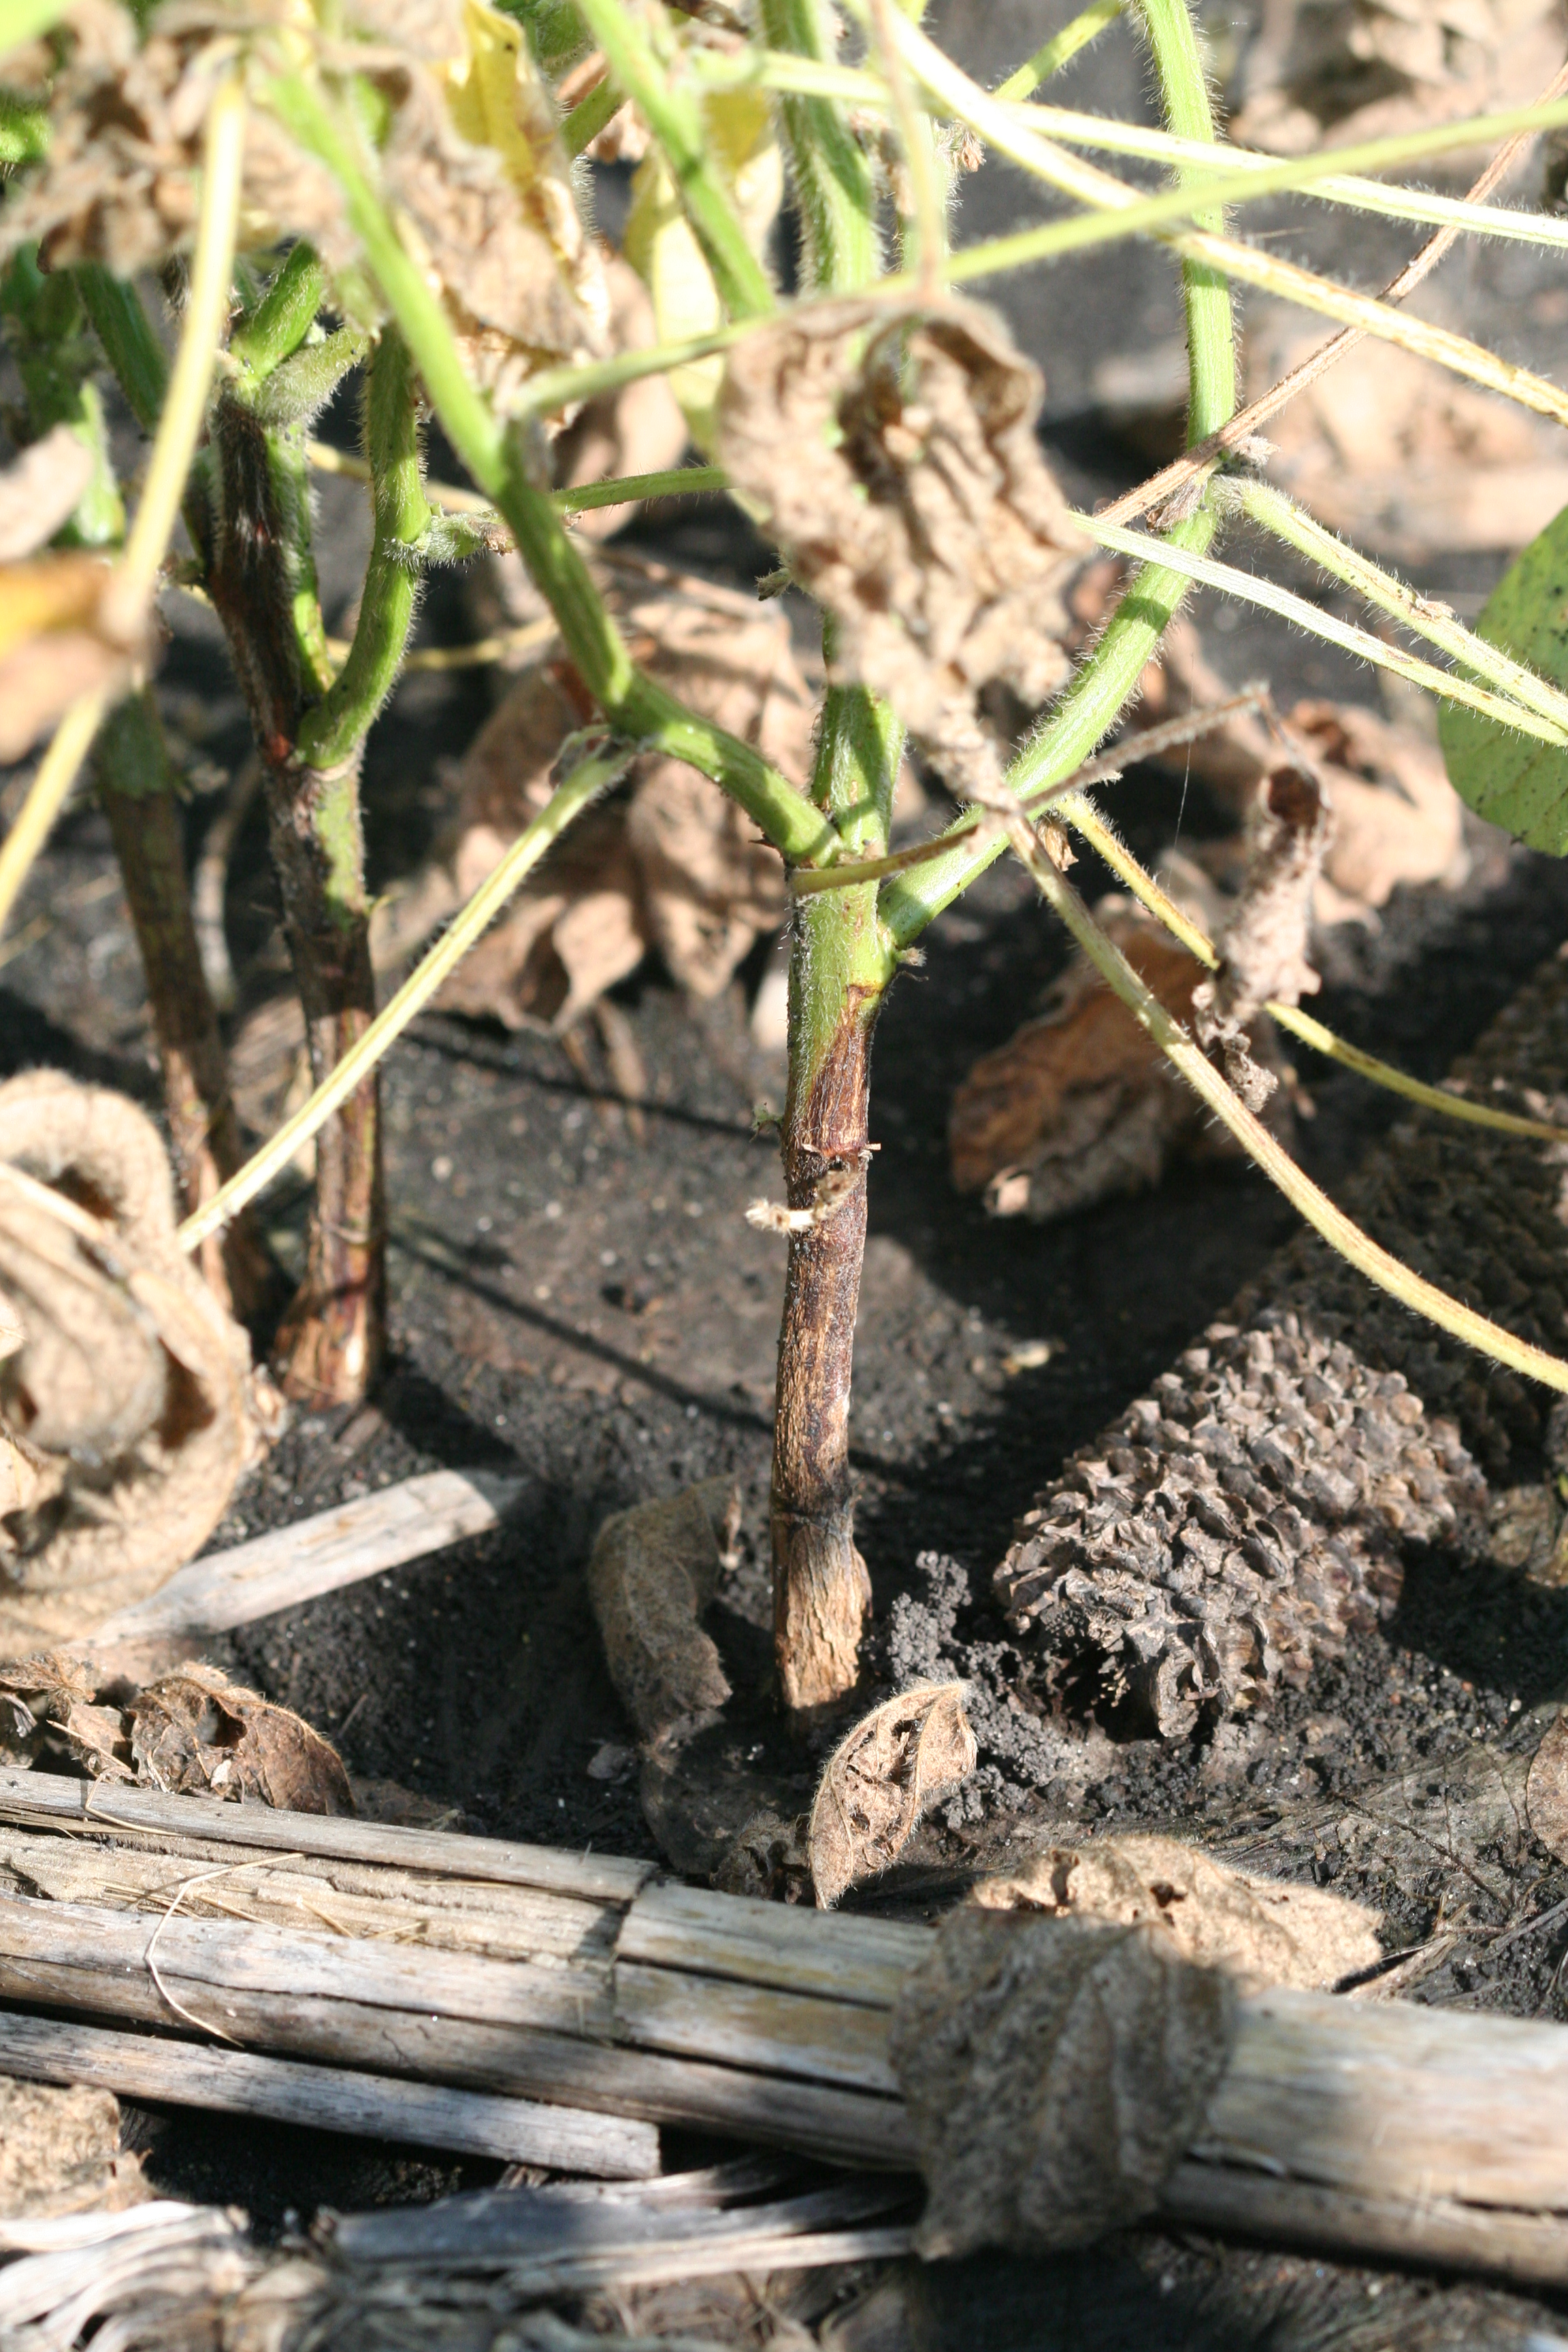 Characteristic stem lesion symptomatic of Phytophthora root and stem rot.